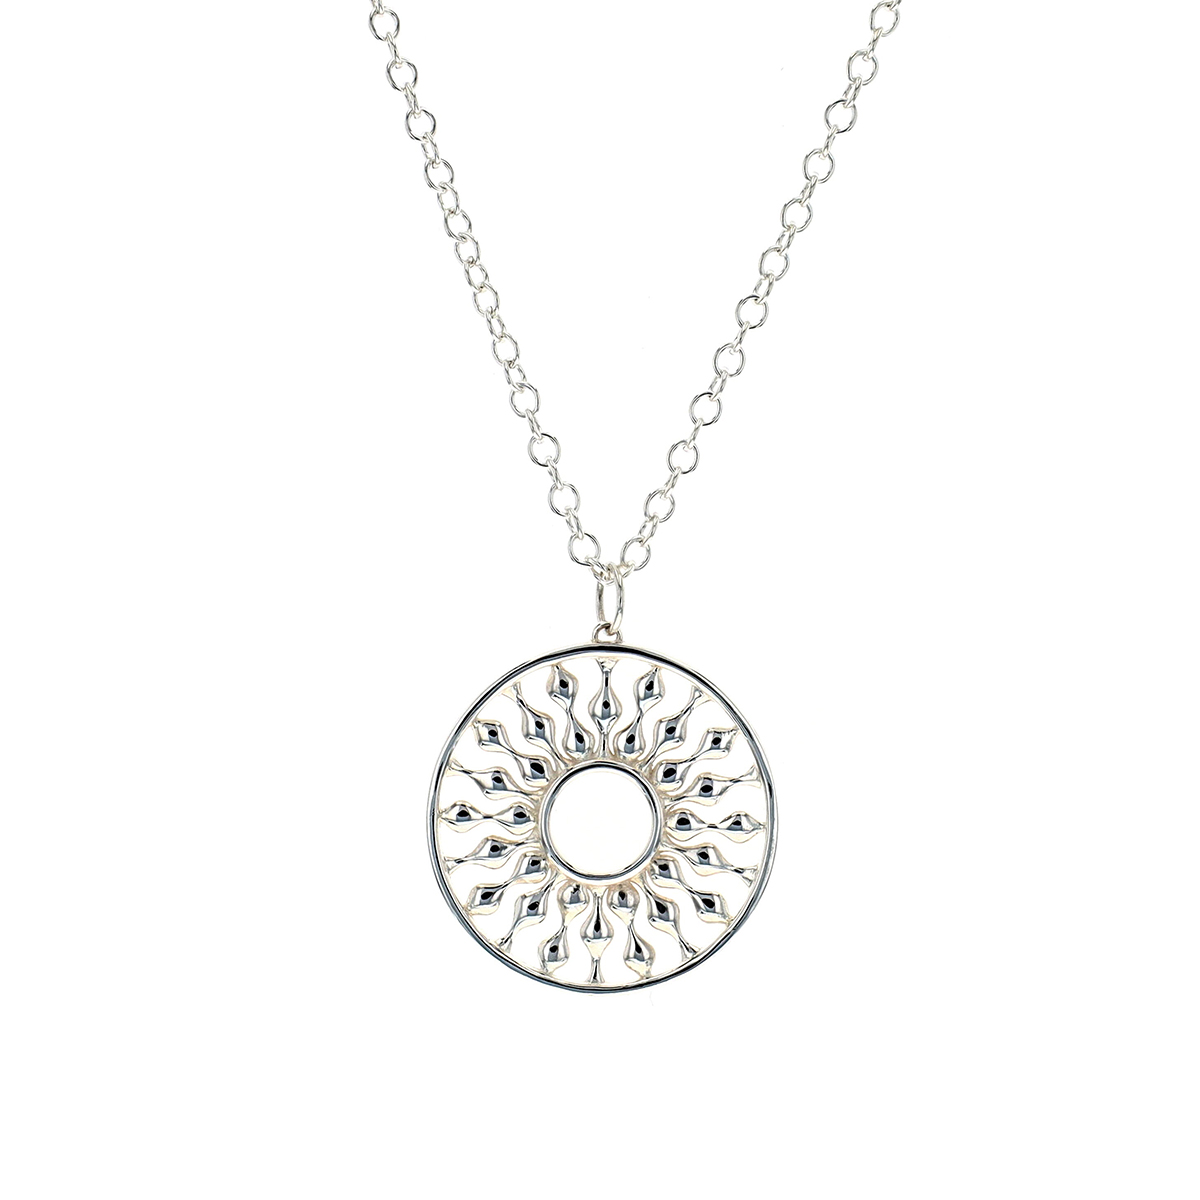 Sterling Silver Radial Sun Pendant and Chain